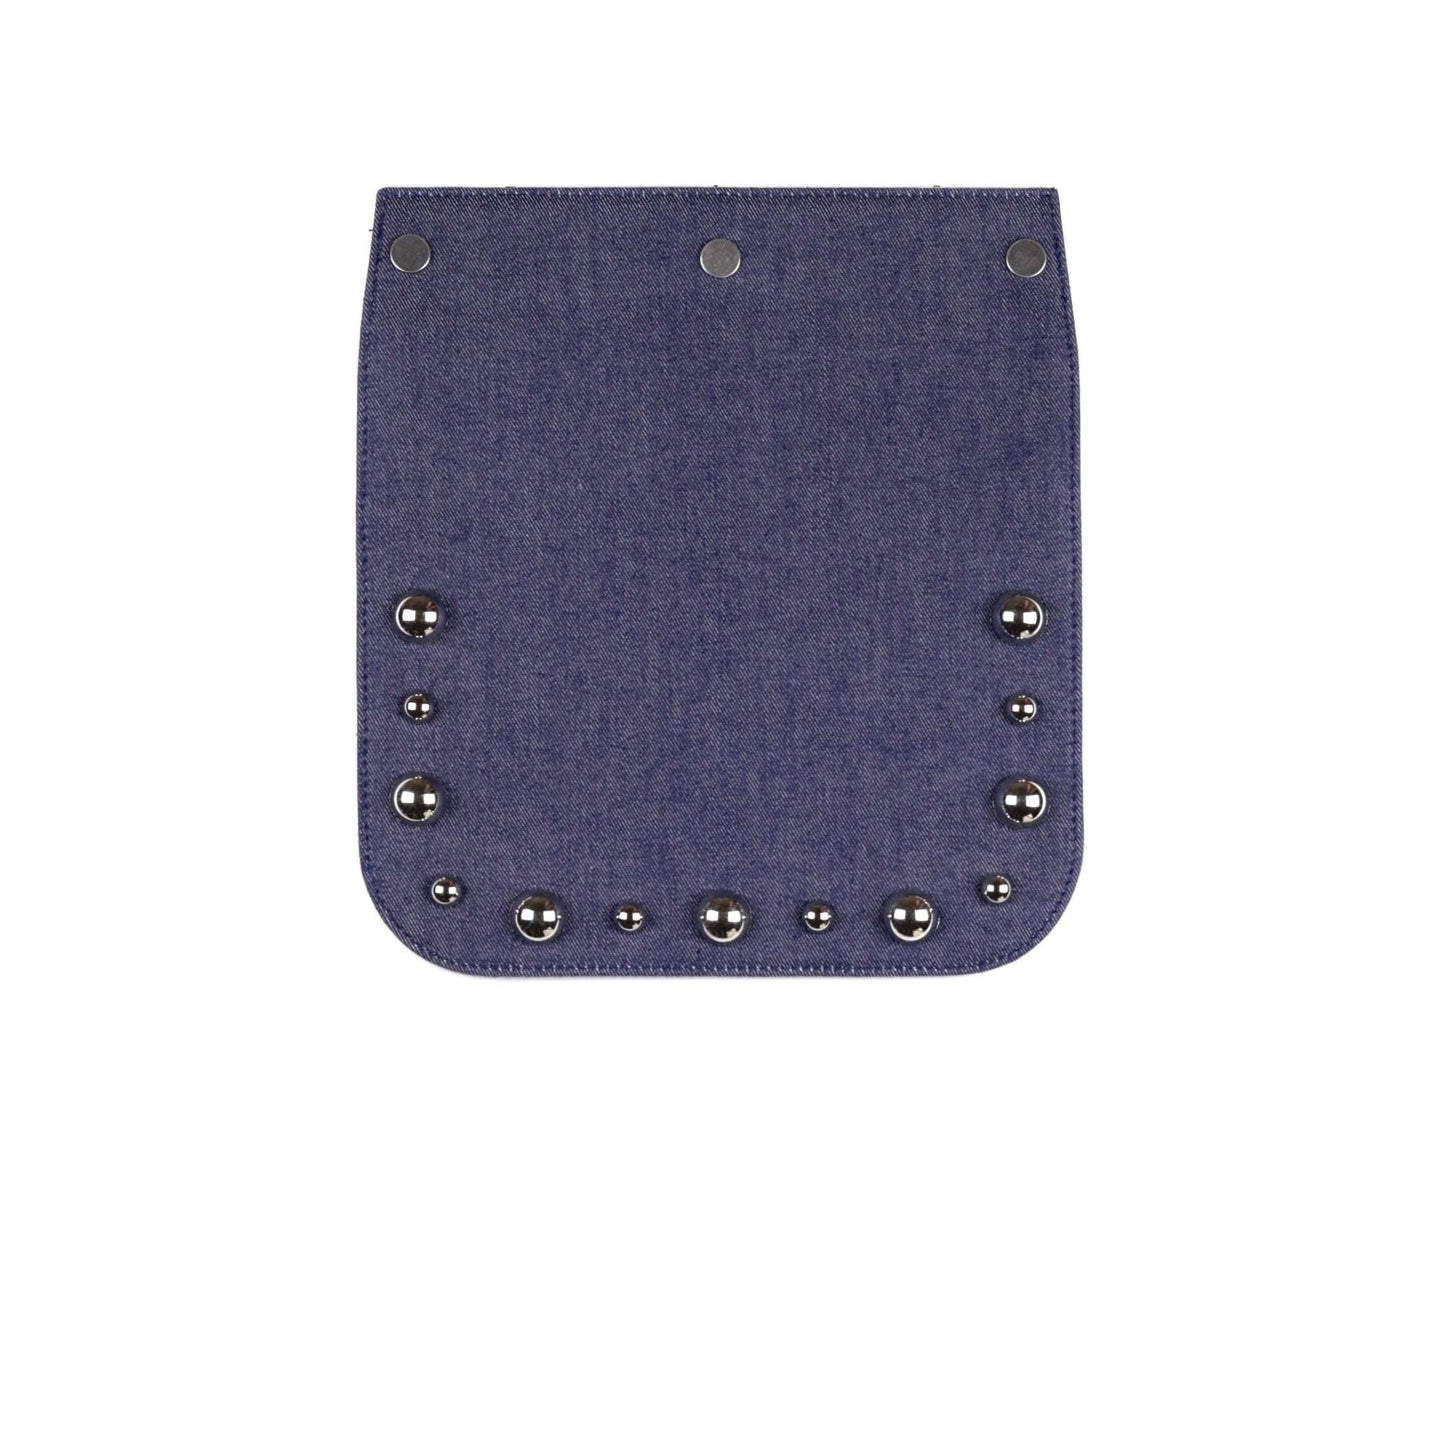 BRONX flap in a dark blue jeans fabric with studs small - PREORDER